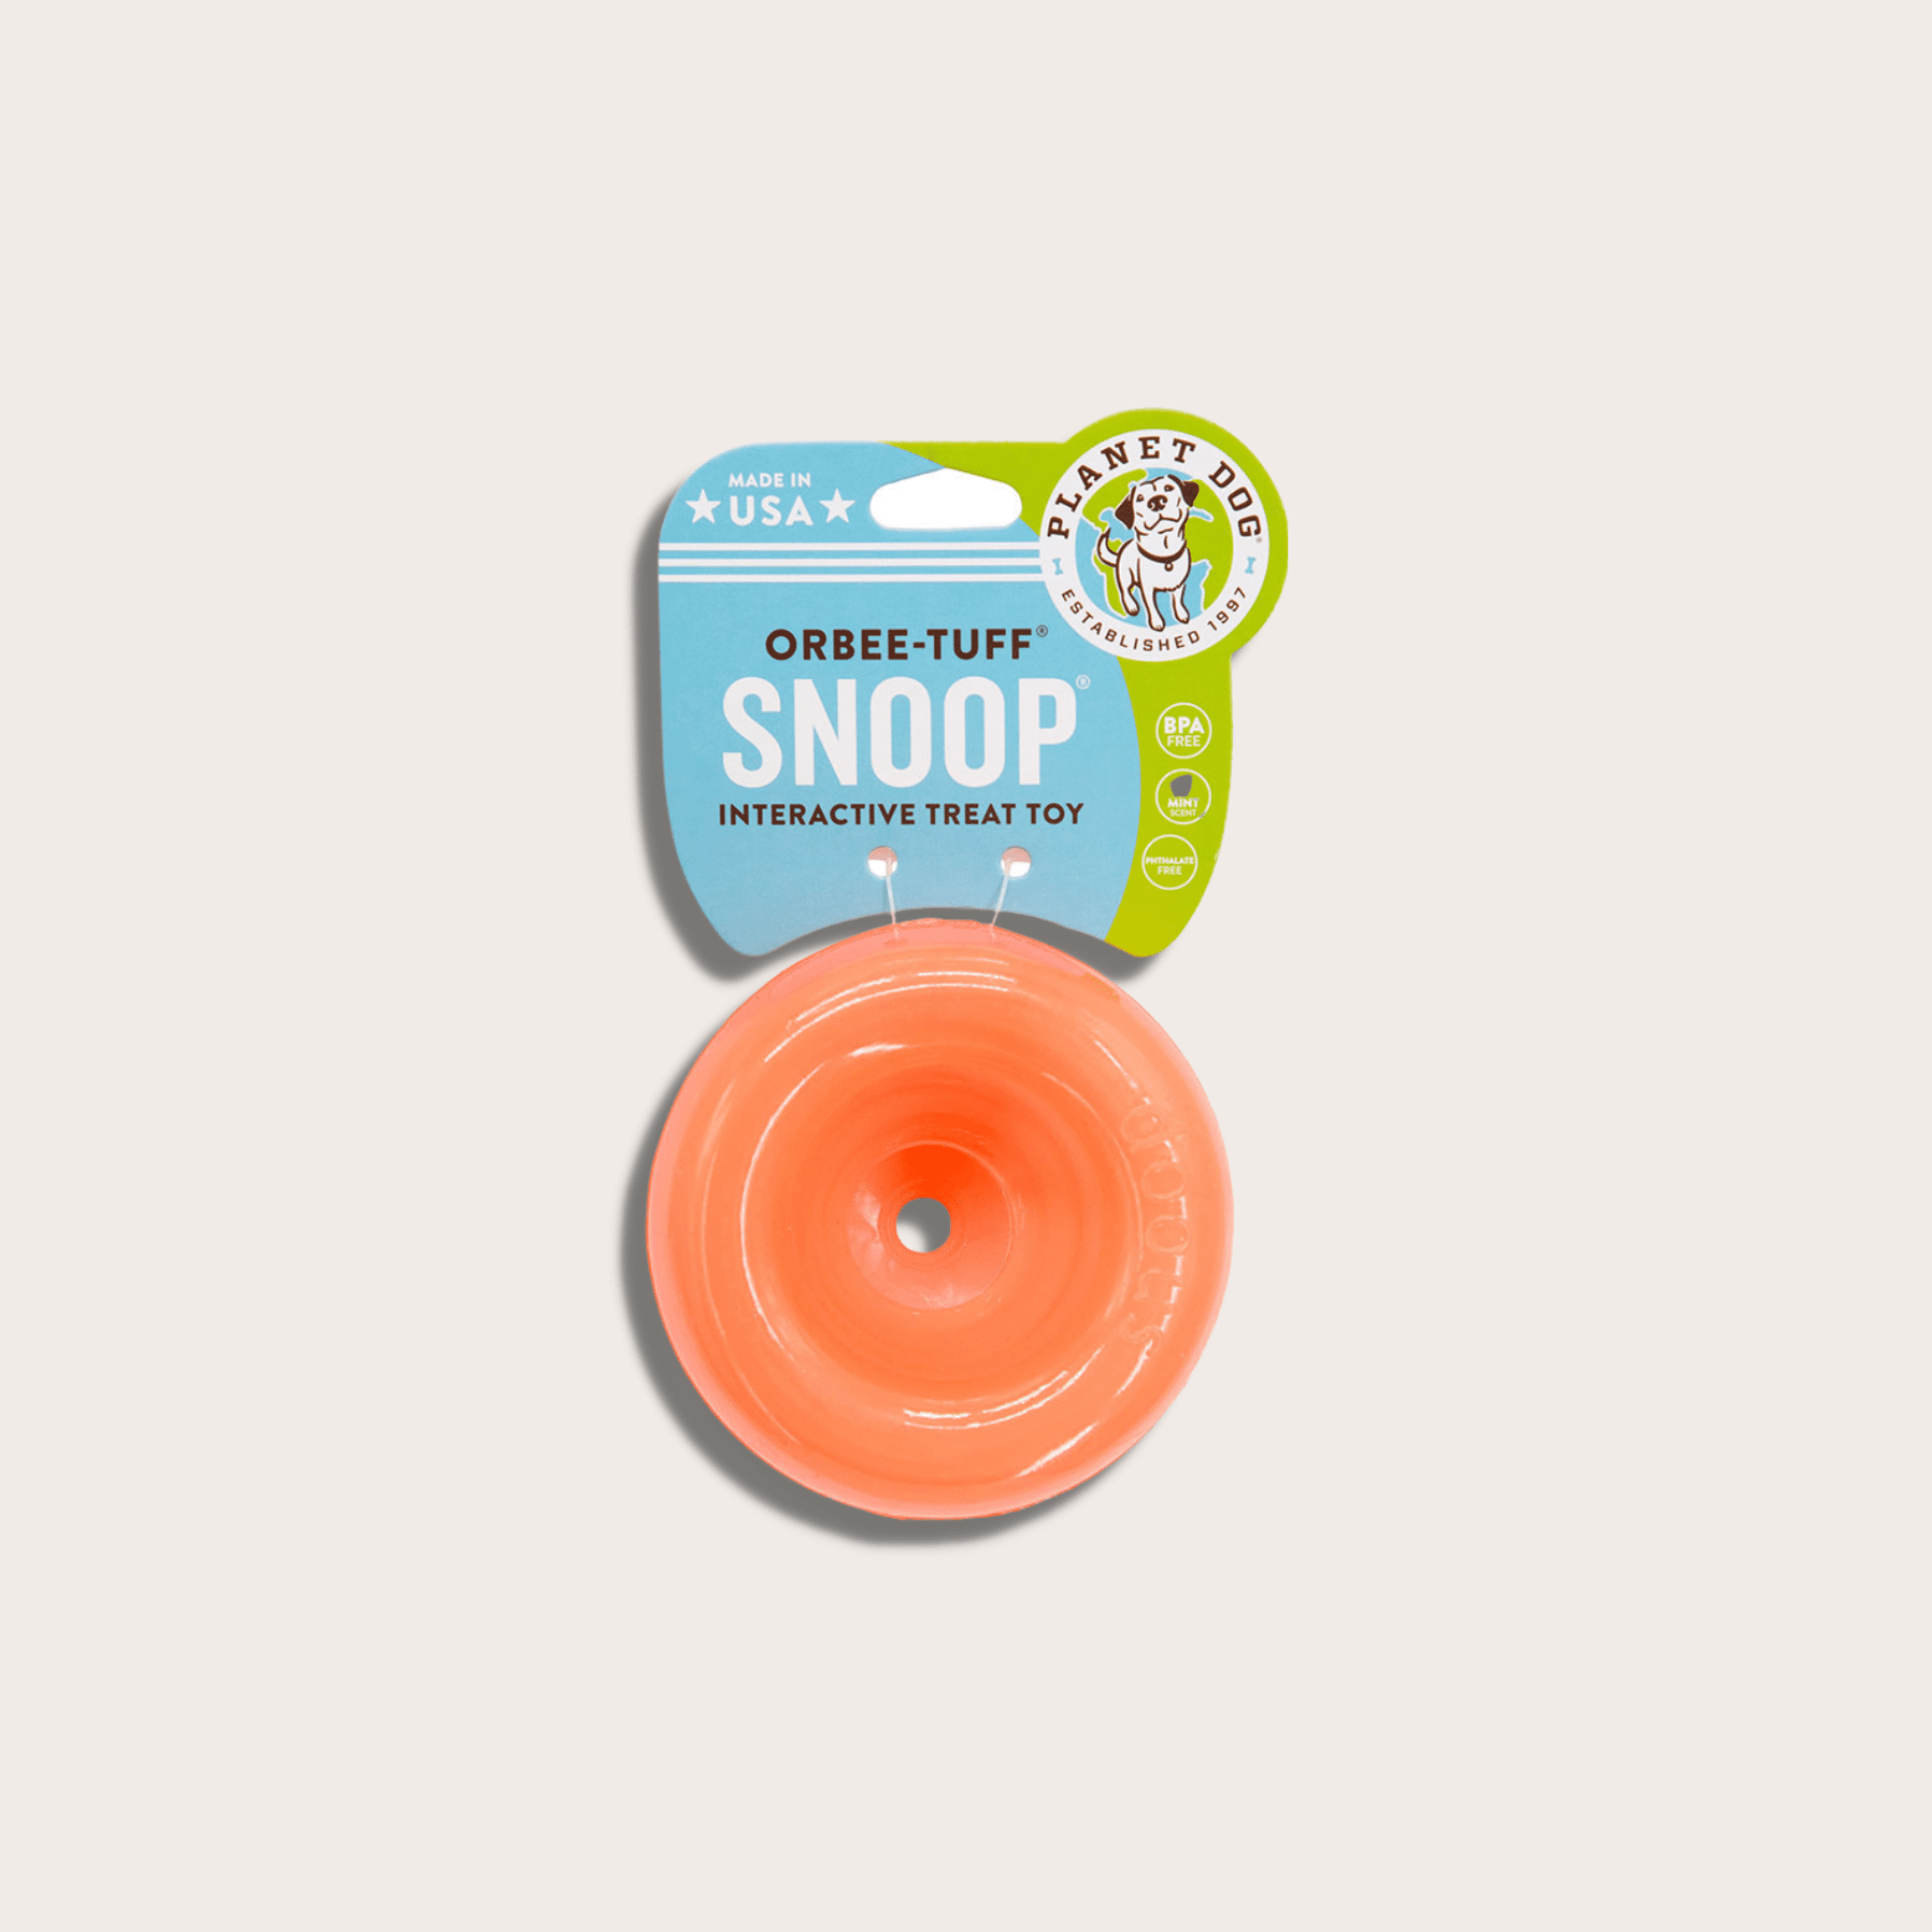 Product Review: Planet Dog Orbee Tuff Snoop and Nook